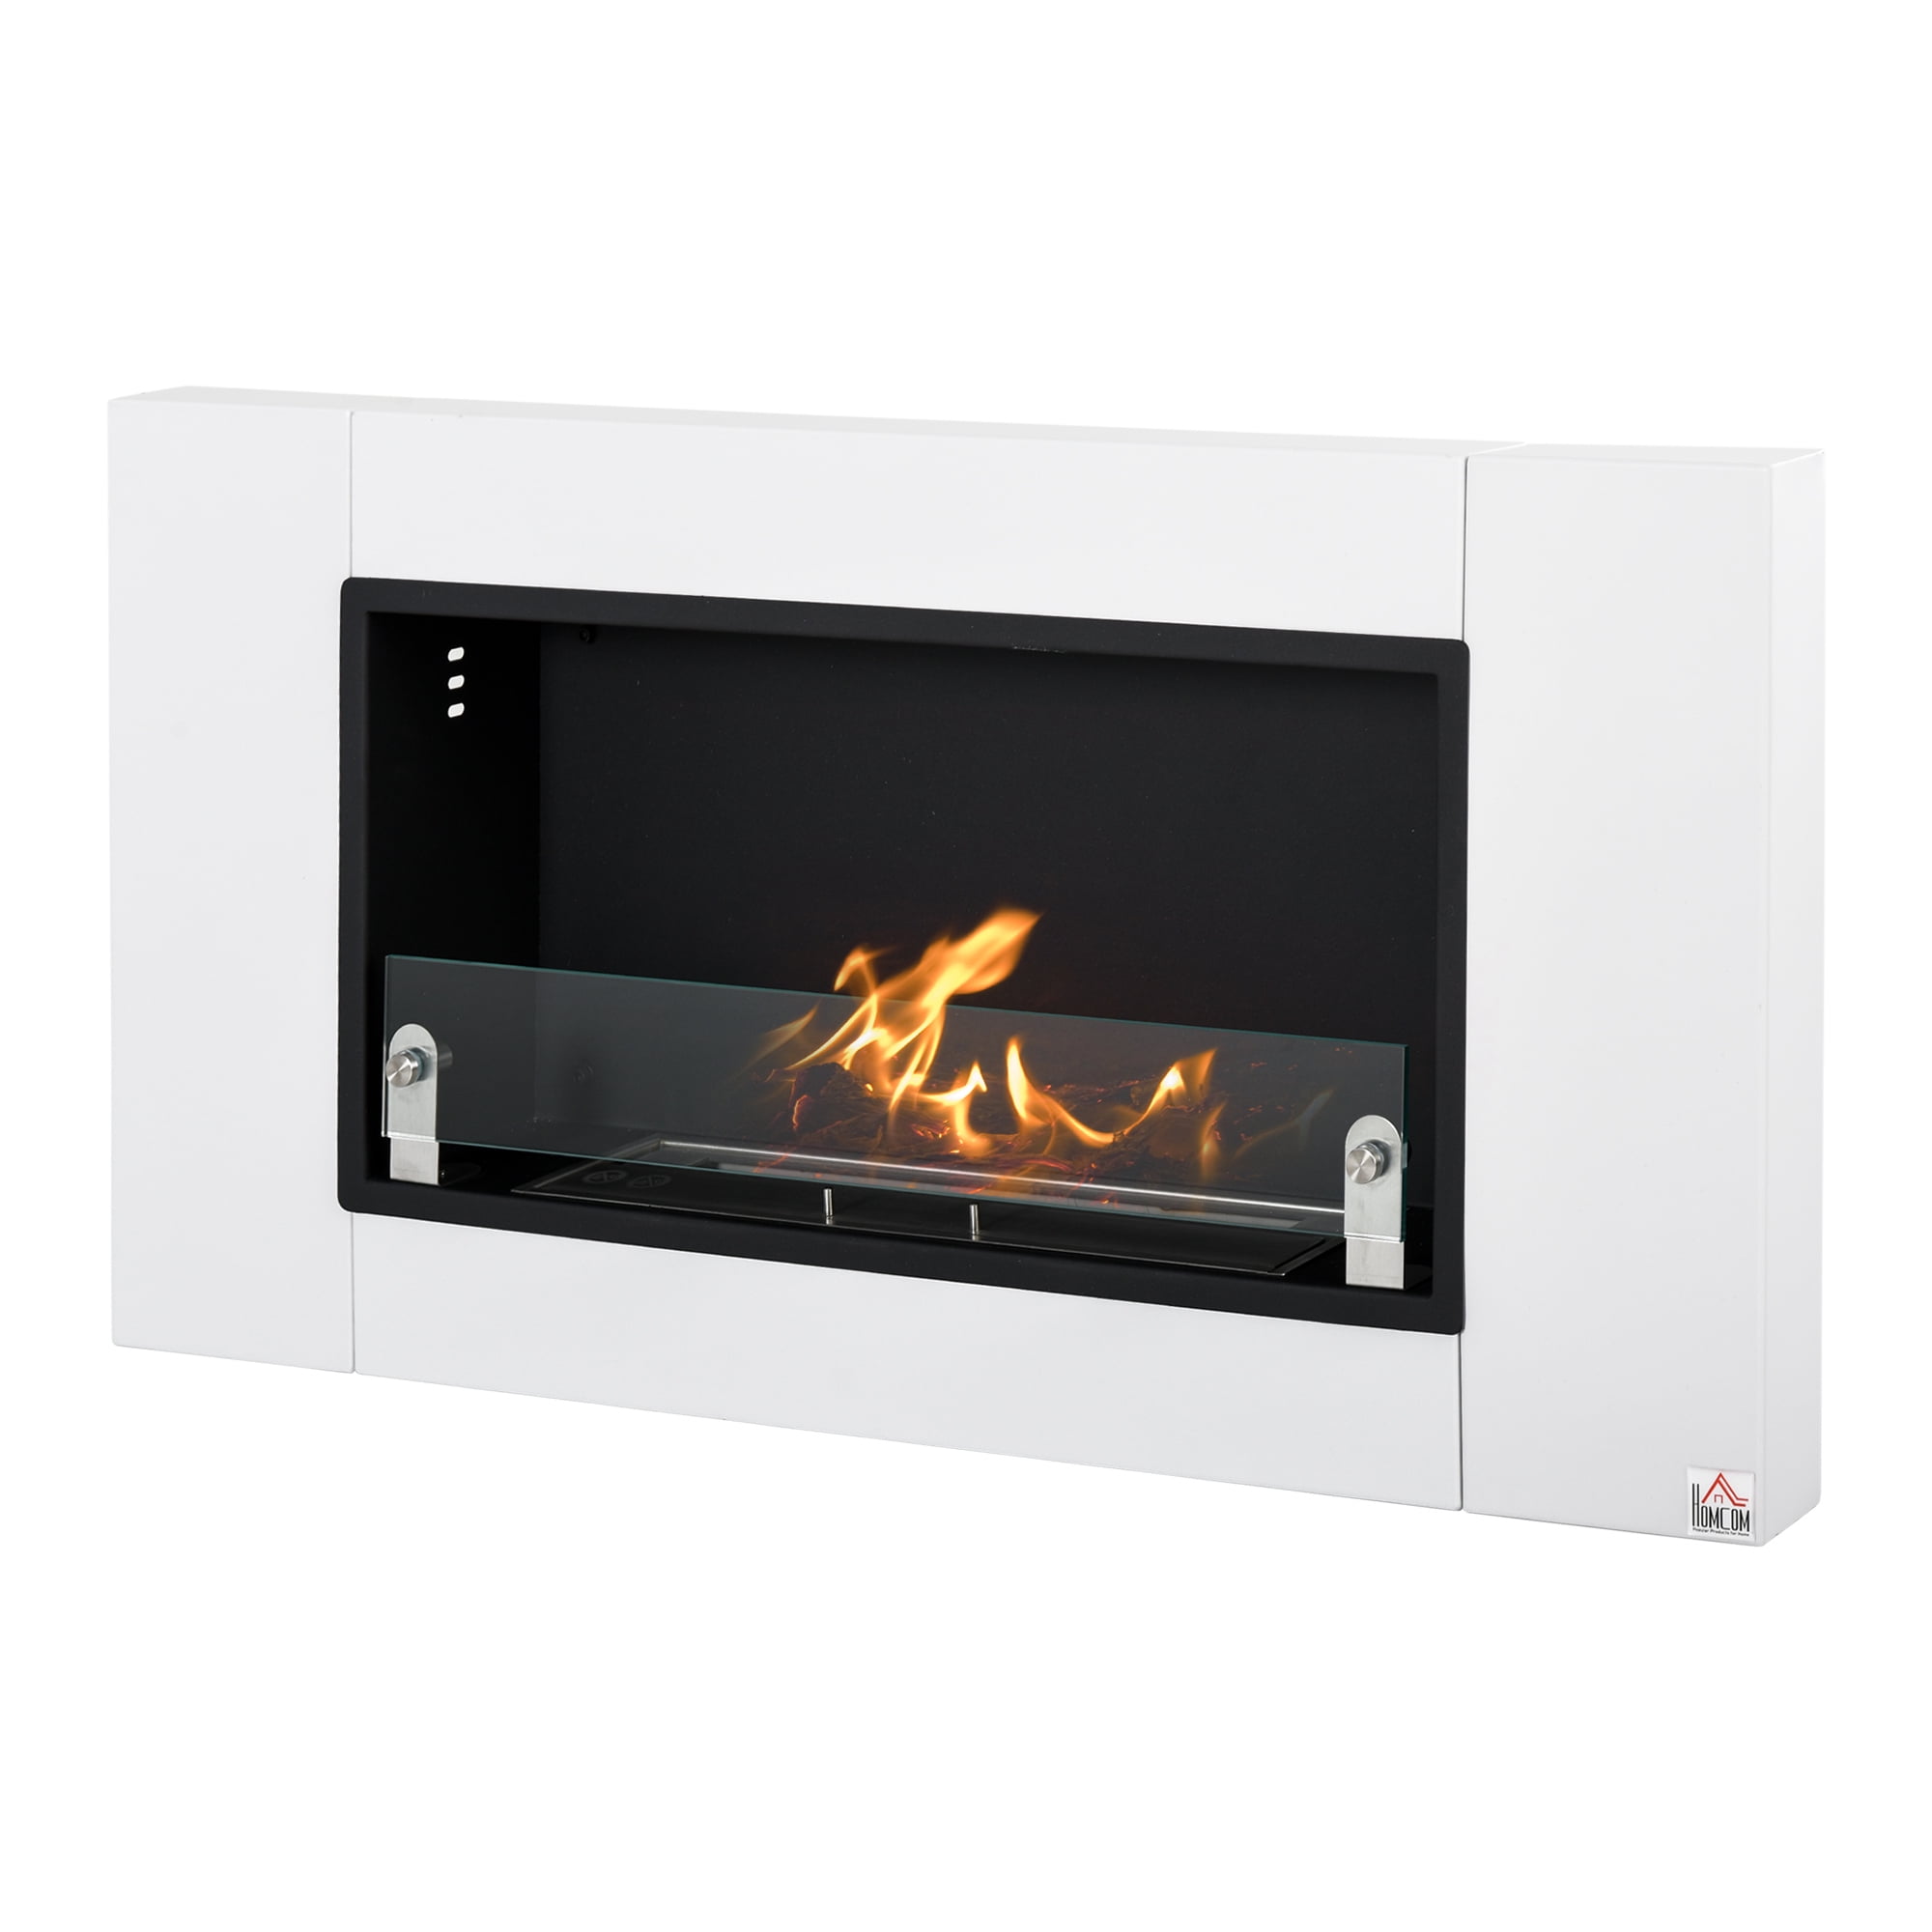 HOMCOM Wall-Mounted Stainless Steel Ethanol Fireplace, 43.25